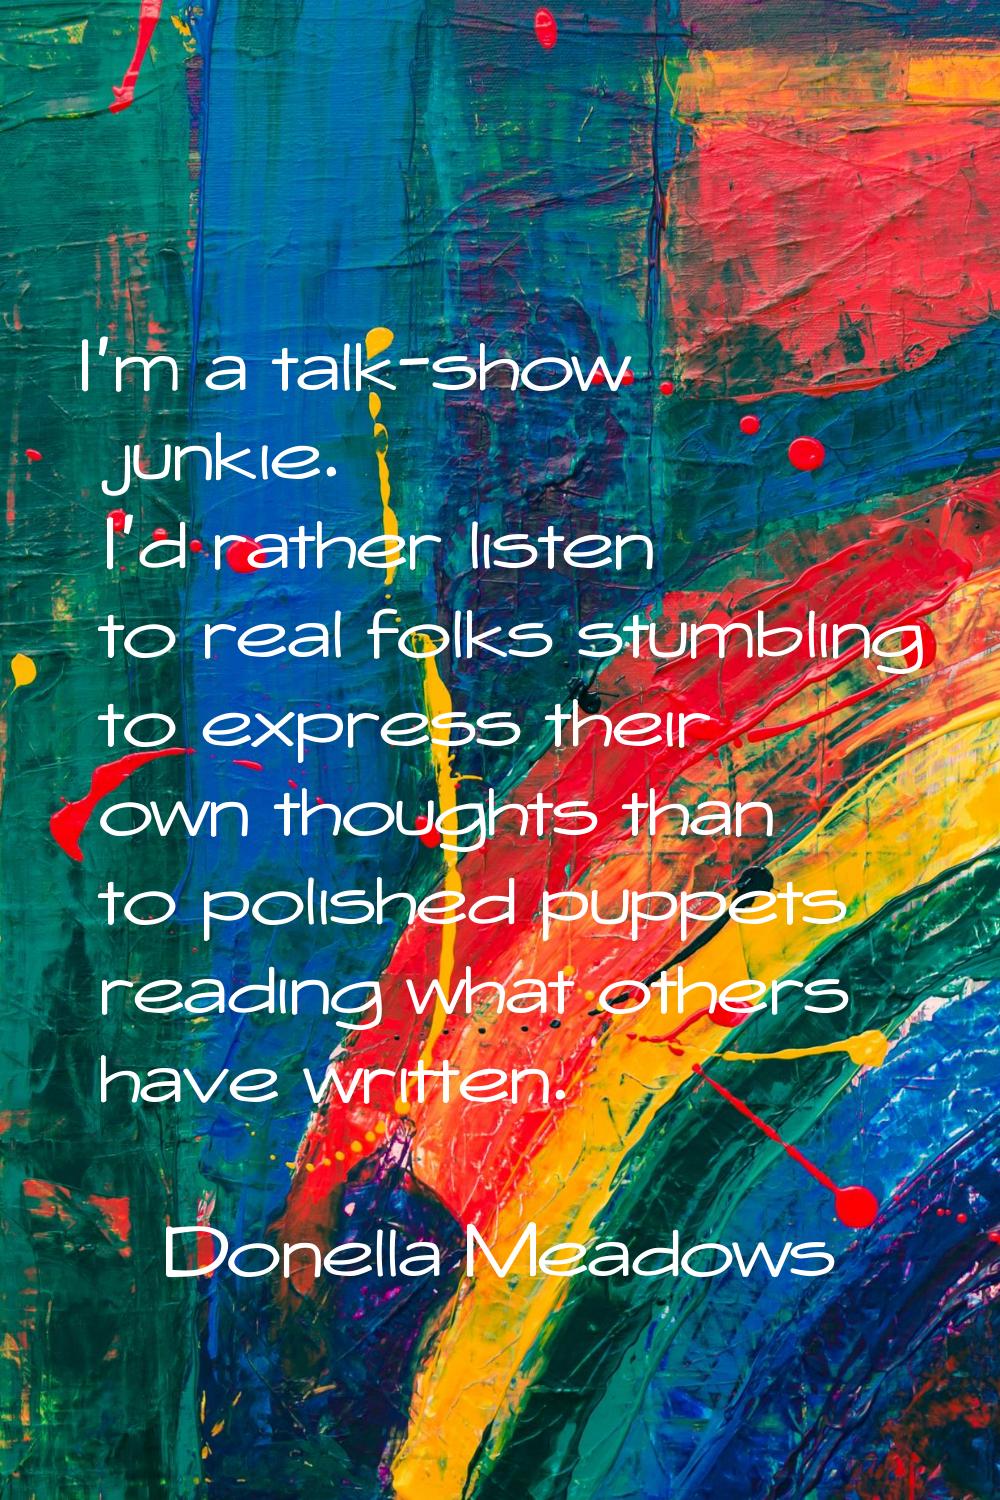 I'm a talk-show junkie. I'd rather listen to real folks stumbling to express their own thoughts tha